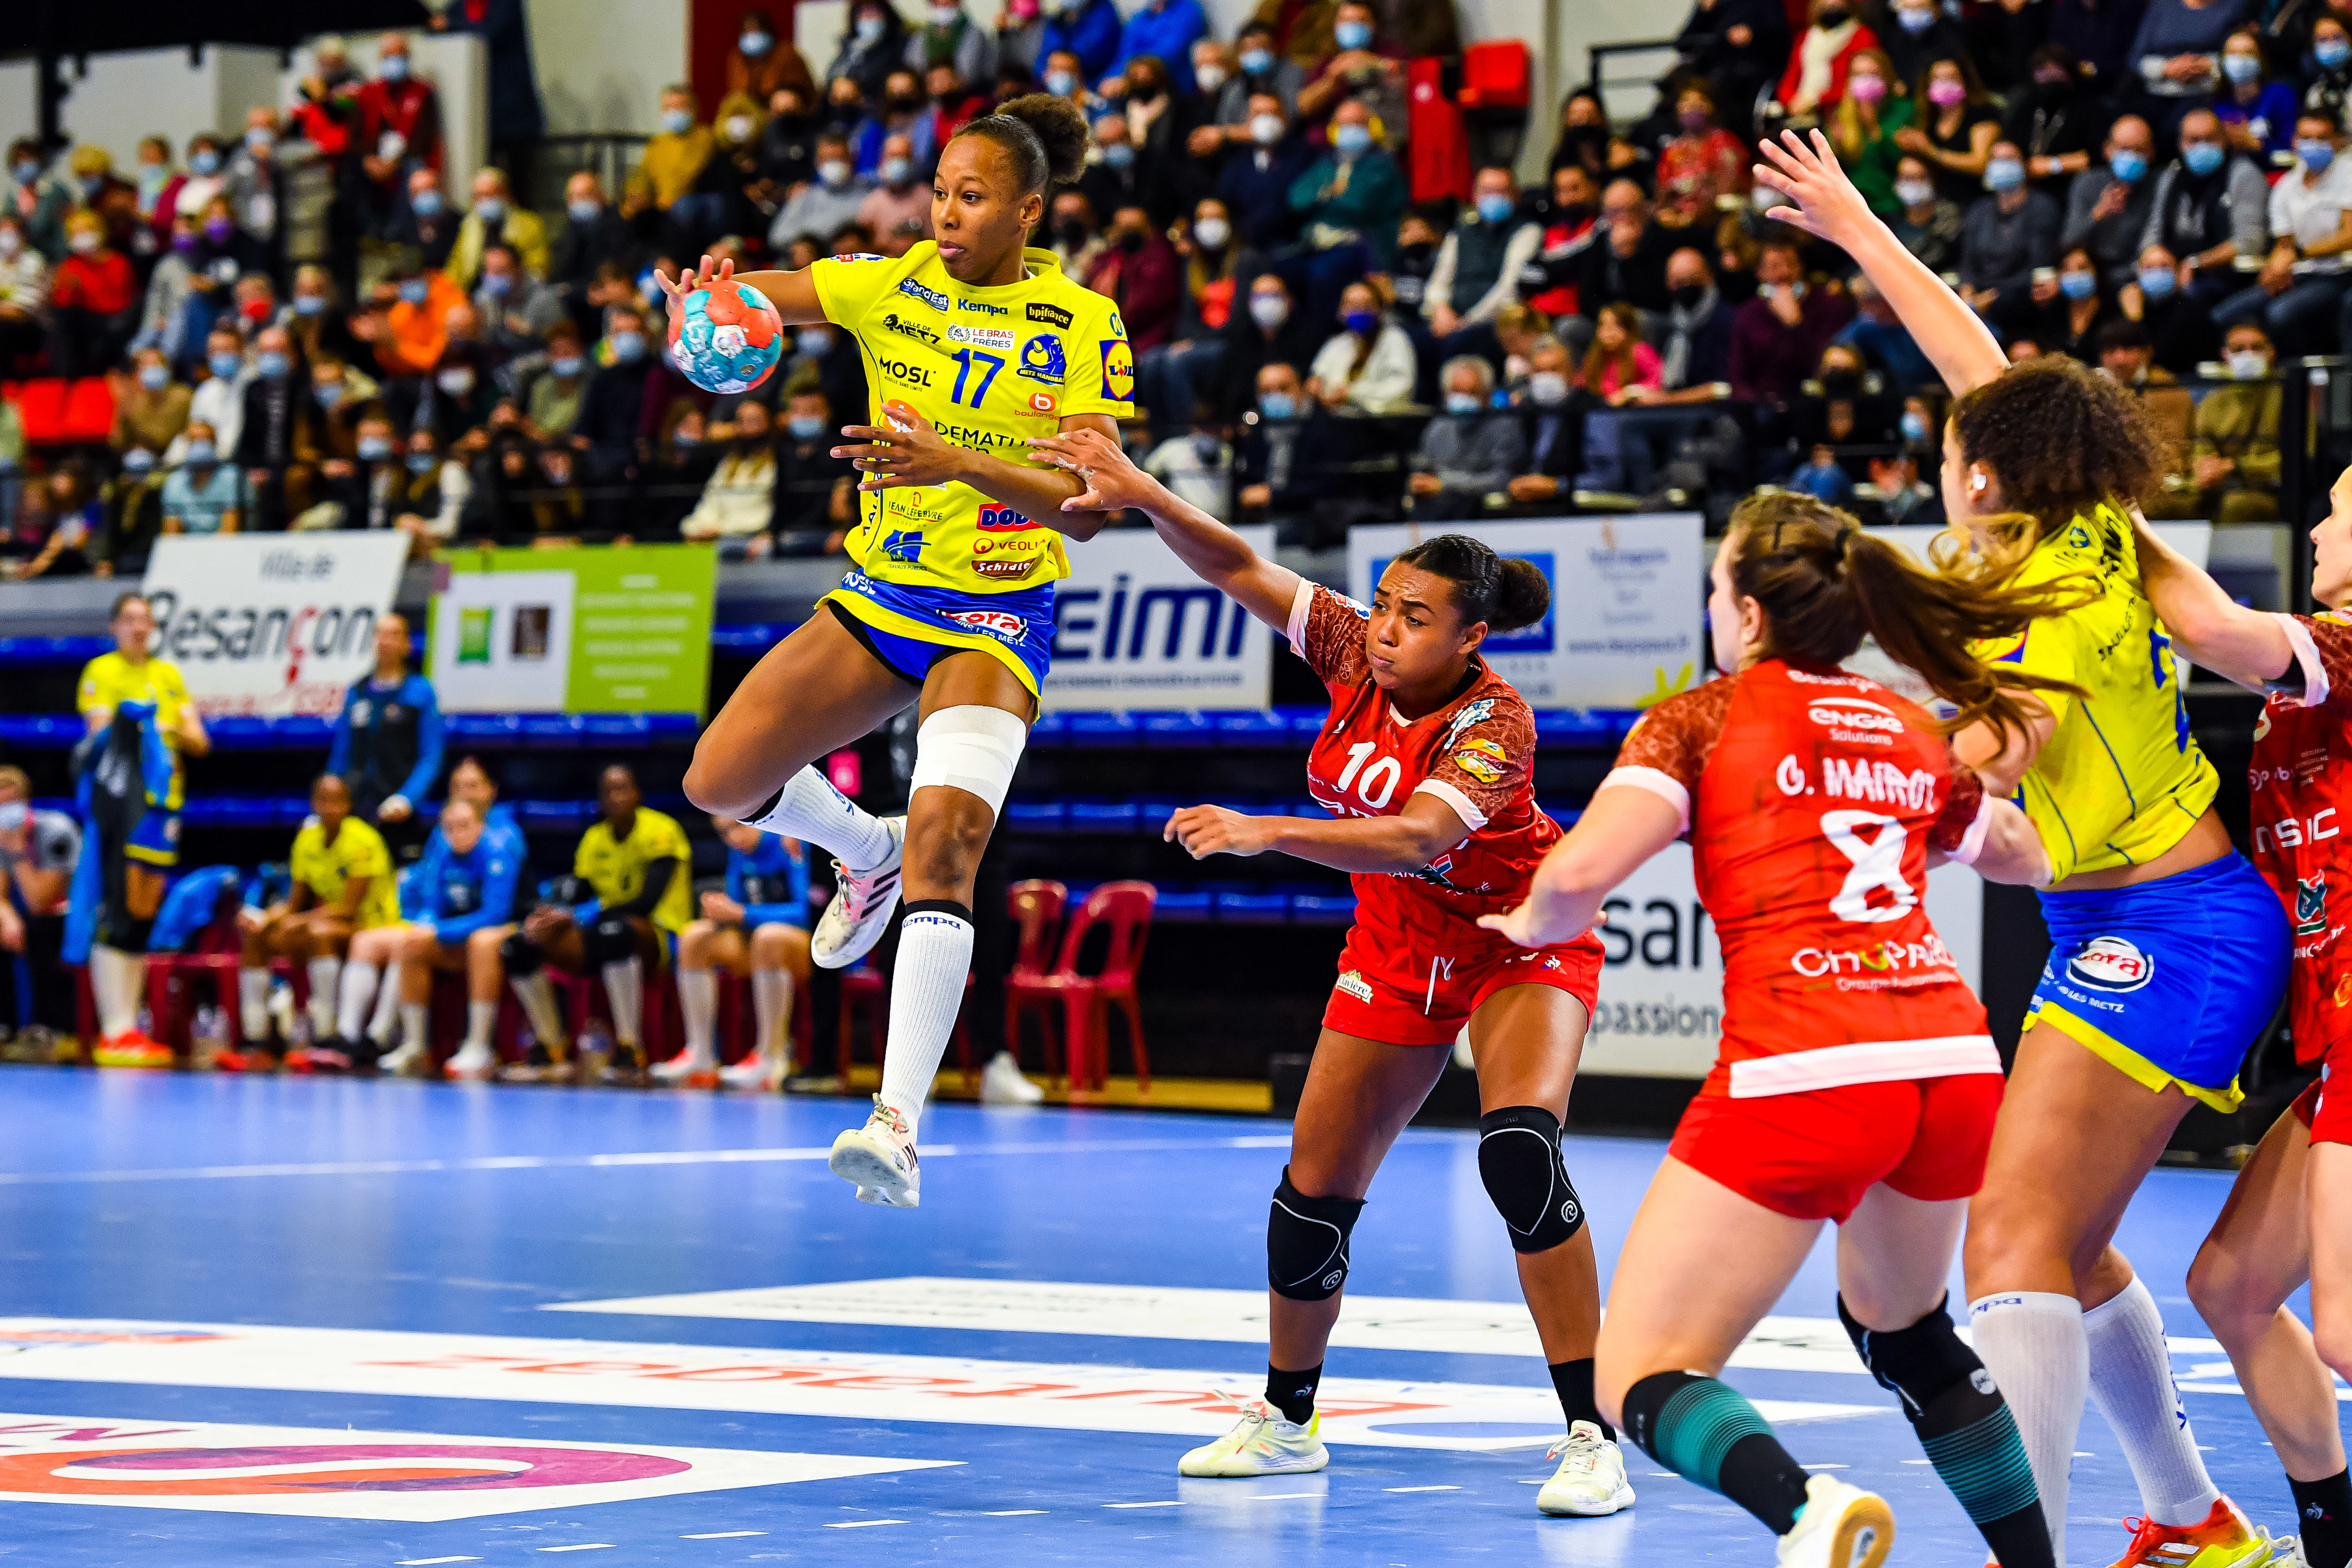 Orlane KANOR of Metz during the French Ligue Butagaz Energie women’s handball match between Besancon and Metz on February 2, 2022 in Besancon, France. (Photo by Baptiste Fernandez/Icon Sport)